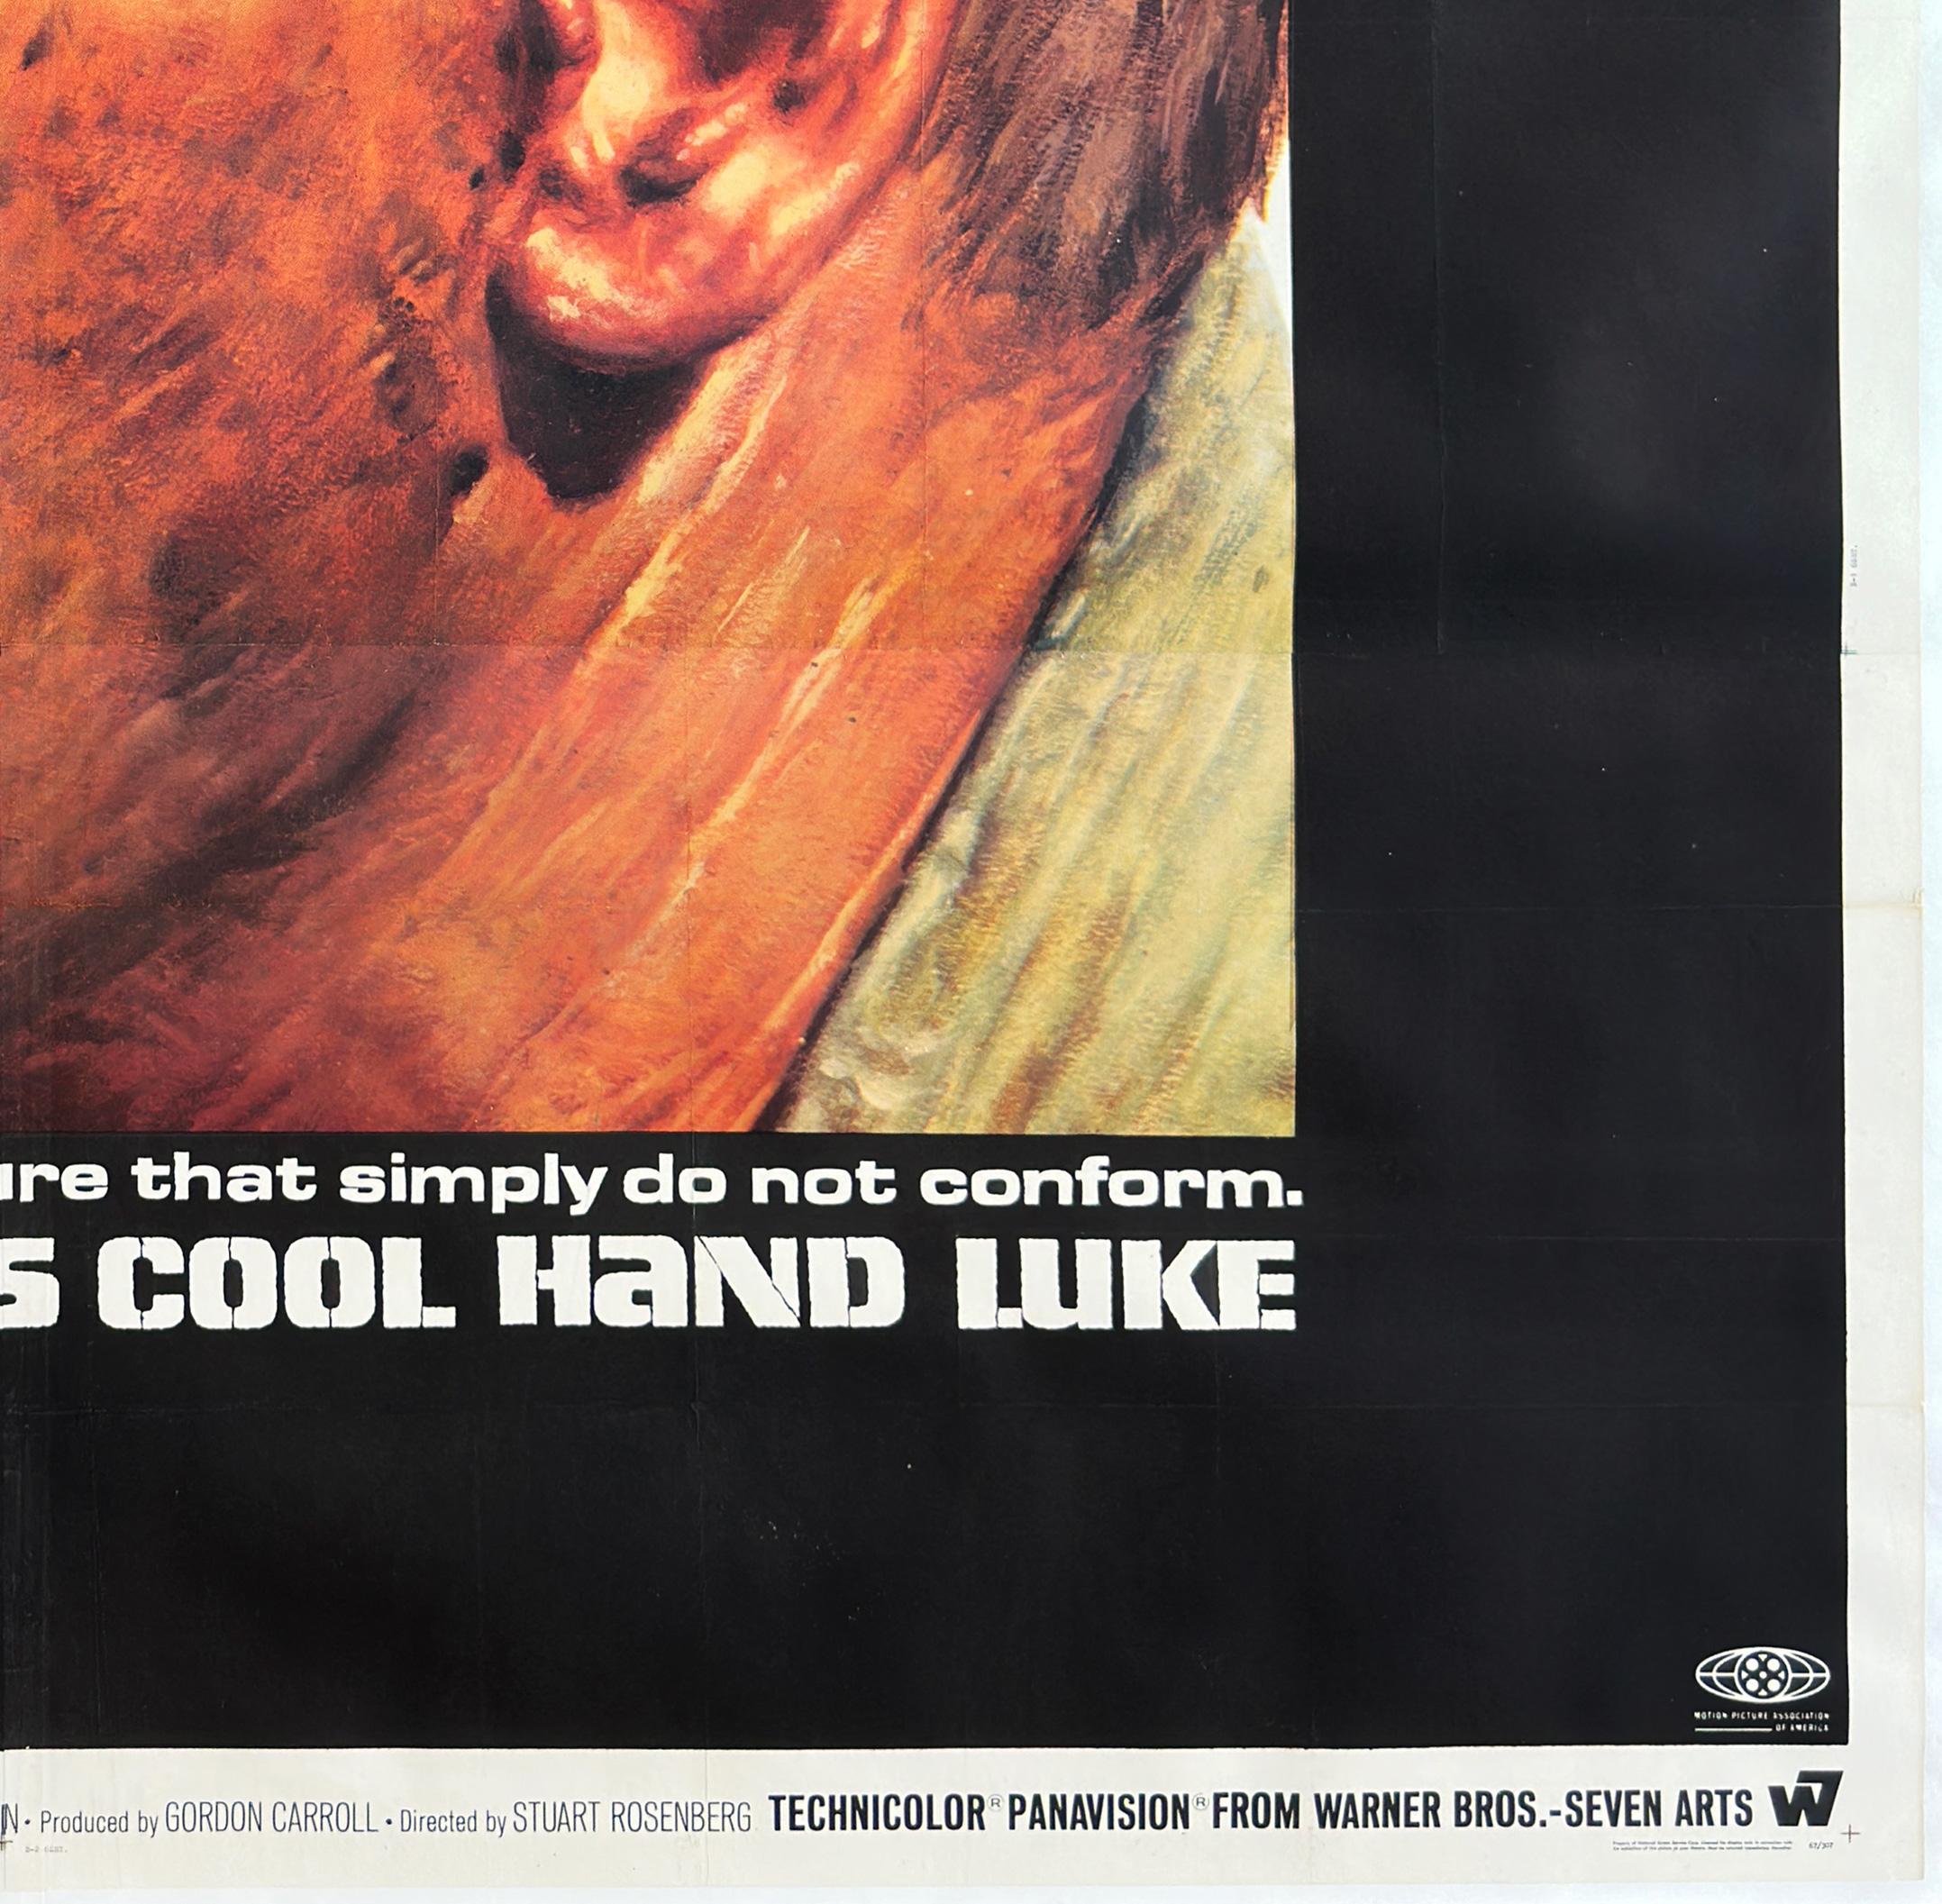 Cool Hand Luke 1967 US 6 Sheet Film Poster In Excellent Condition For Sale In Bath, Somerset